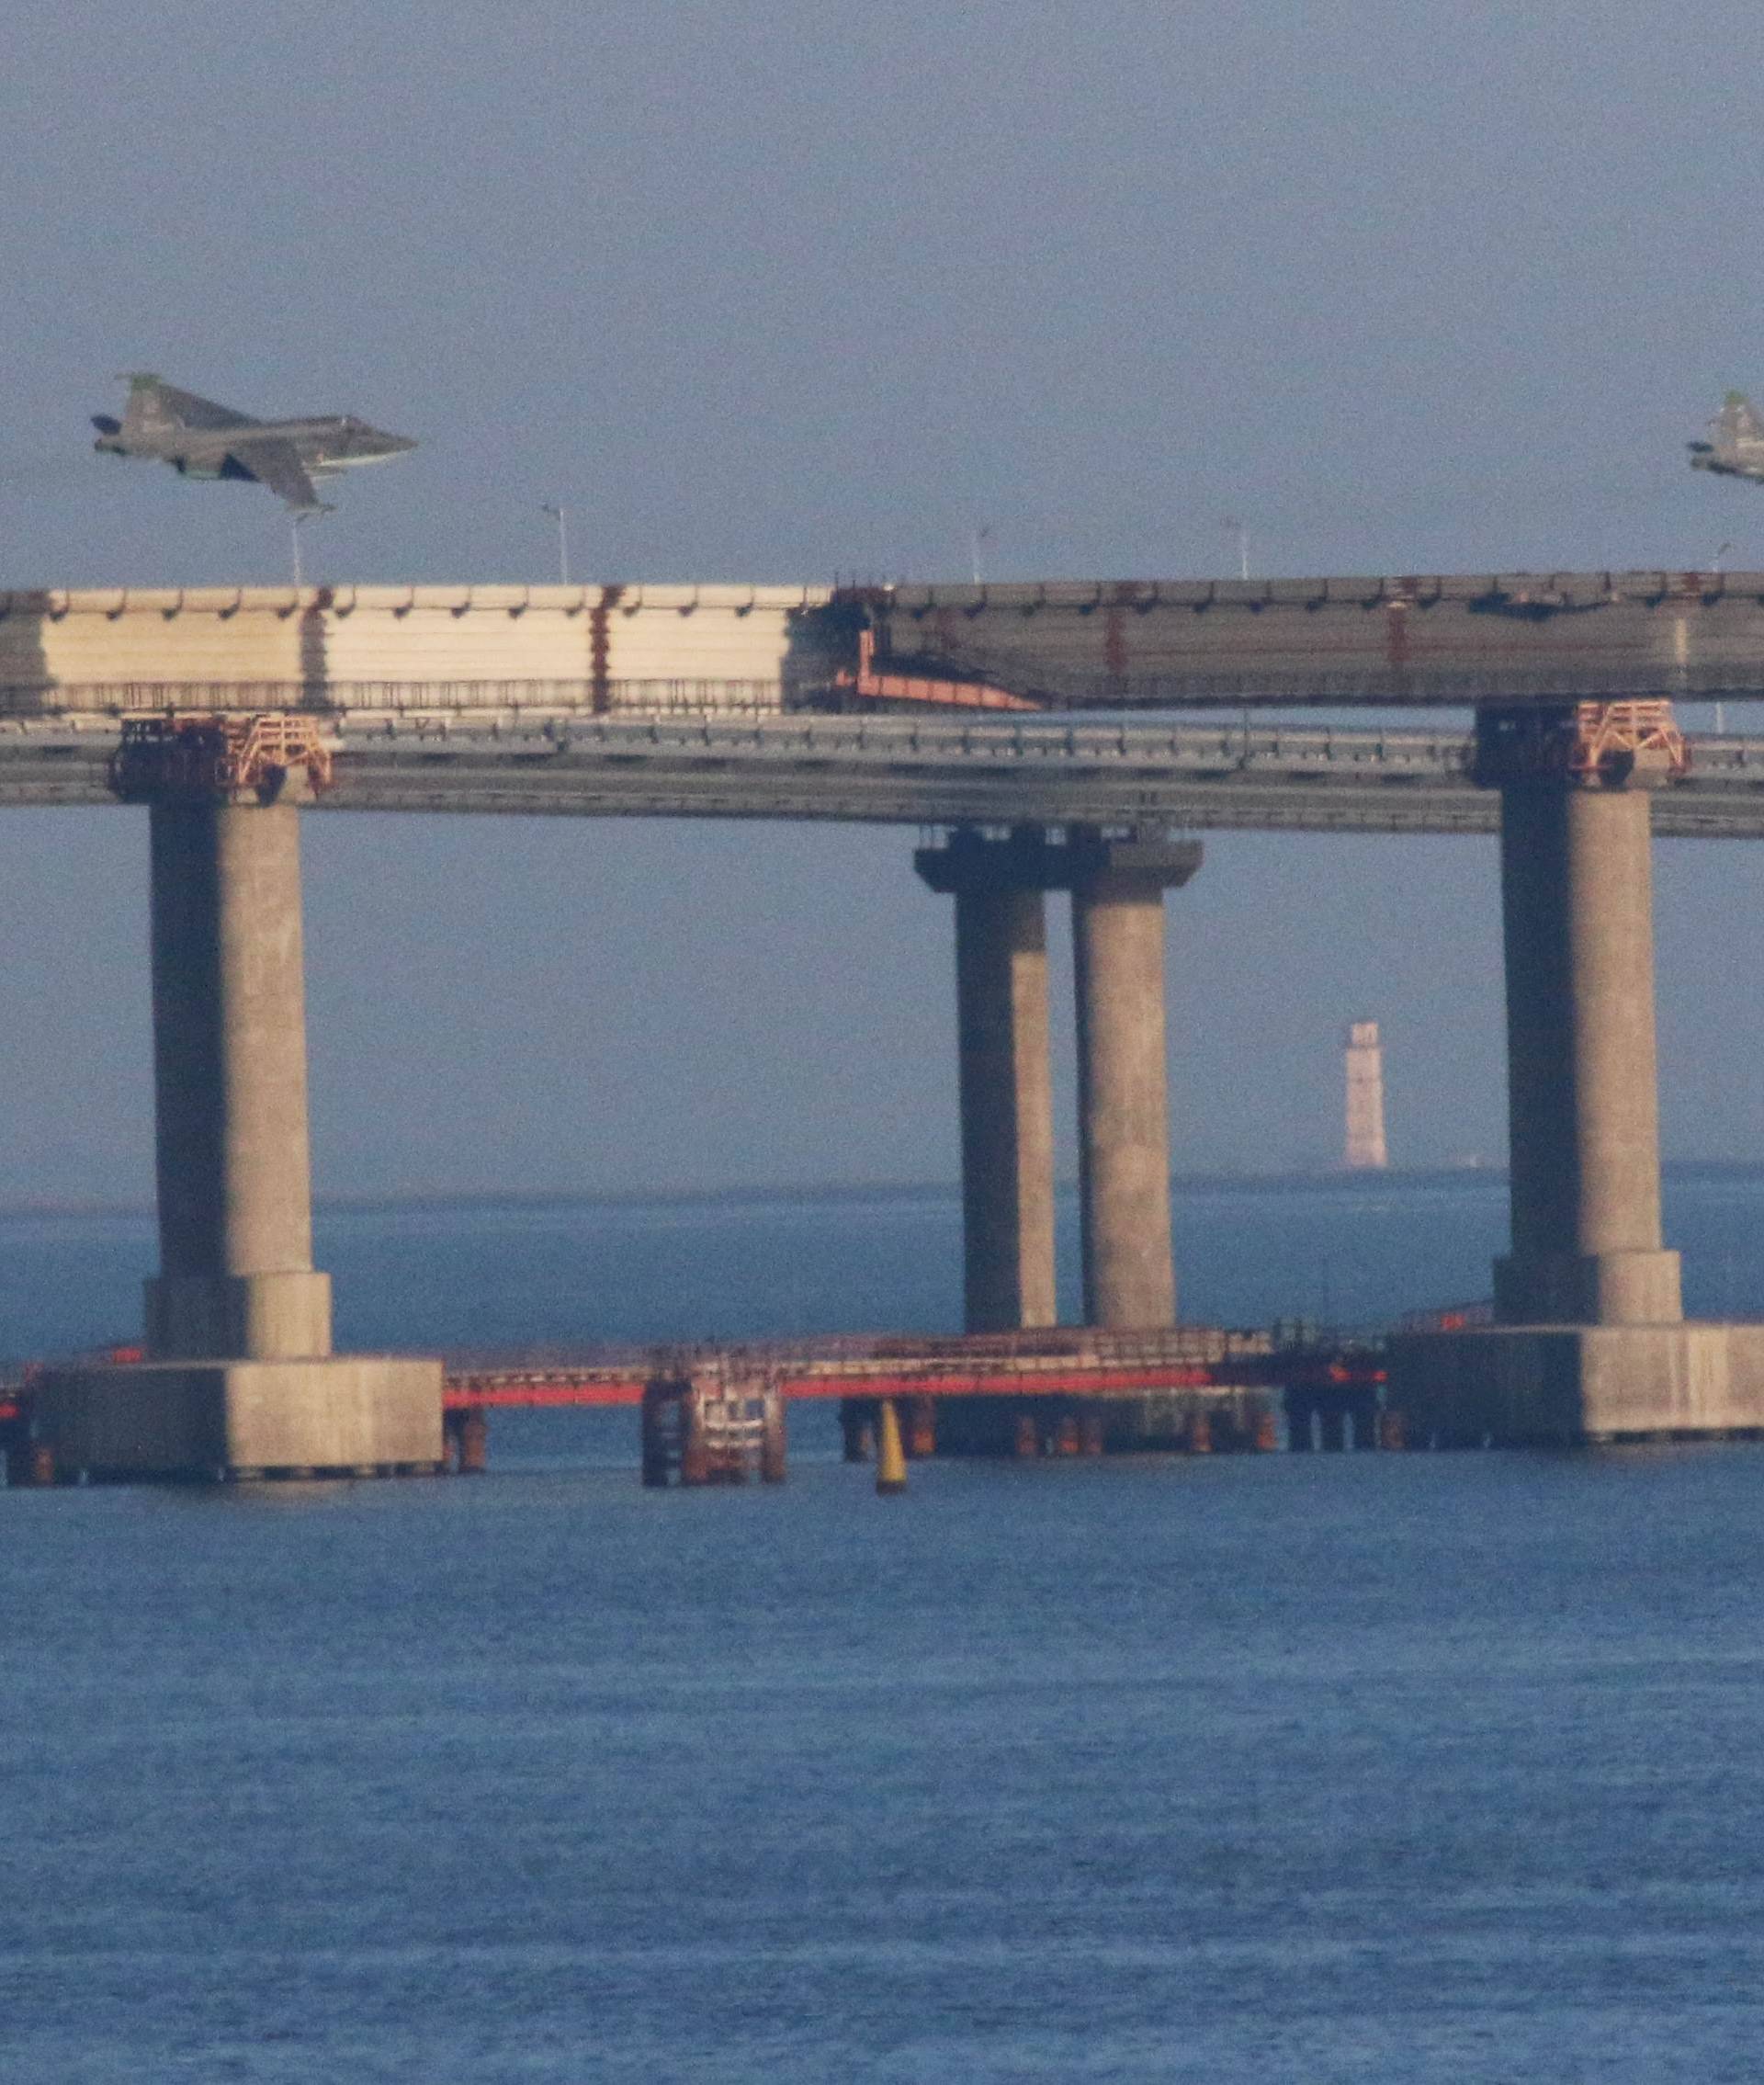 Russian jet fighters fly over a bridge connecting the Russian mainland with the Crimean Peninsula after three Ukrainian navy vessels were stopped by Russia from entering the Sea of Azov via the Kerch Strait in the Black Sea